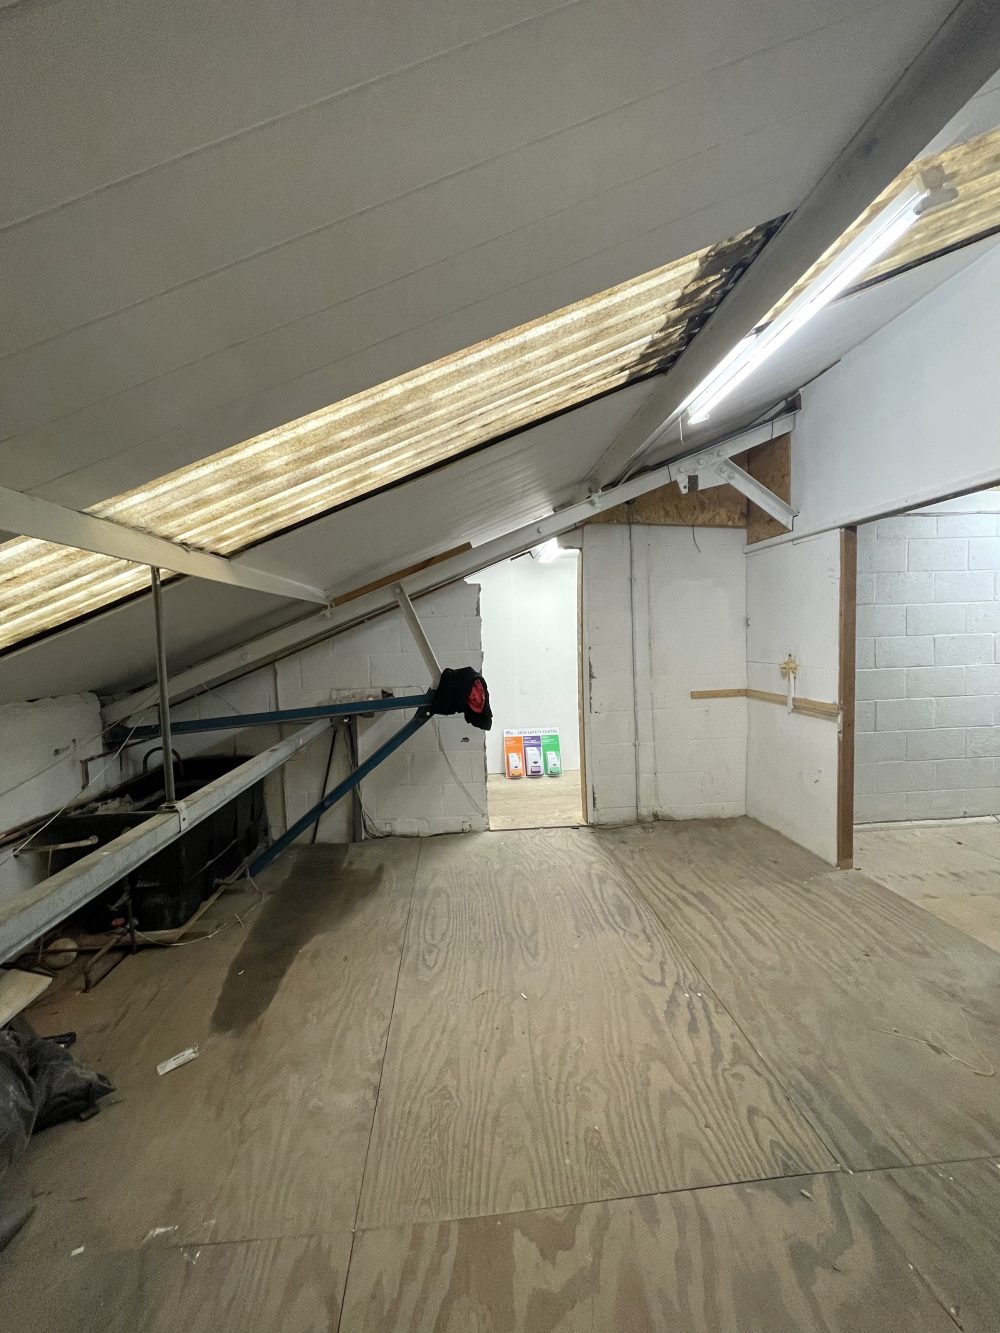 N15 Seven Sisters (High Cross, Fountayne Road) – Live work style Warehouse Unit to rent for artists 28